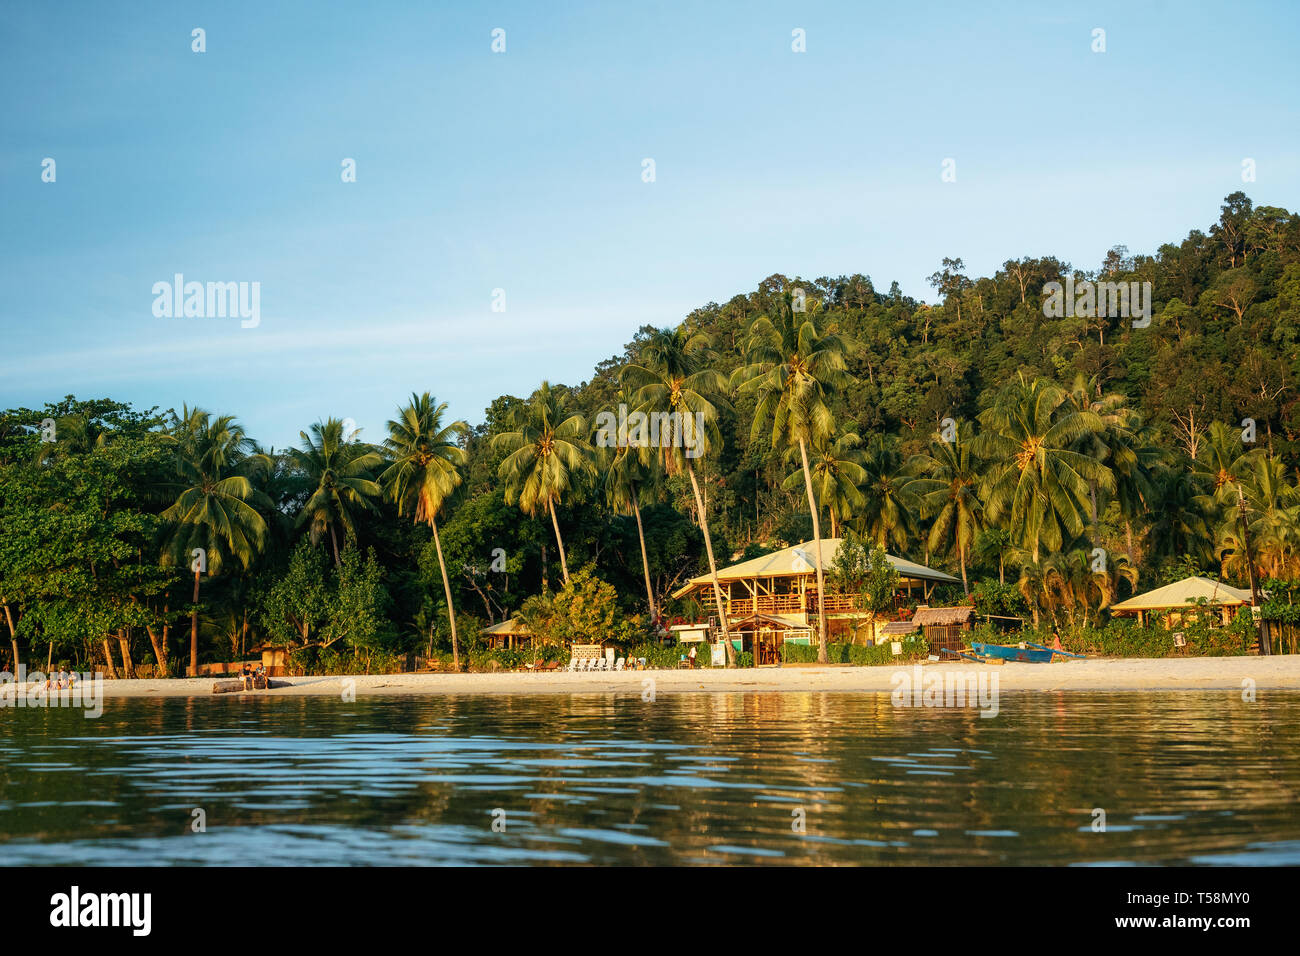 Port Barton, Palawan, Philippines - February 2, 2019: People on tropical beach with trees against wooden hotel at sunset Stock Photo